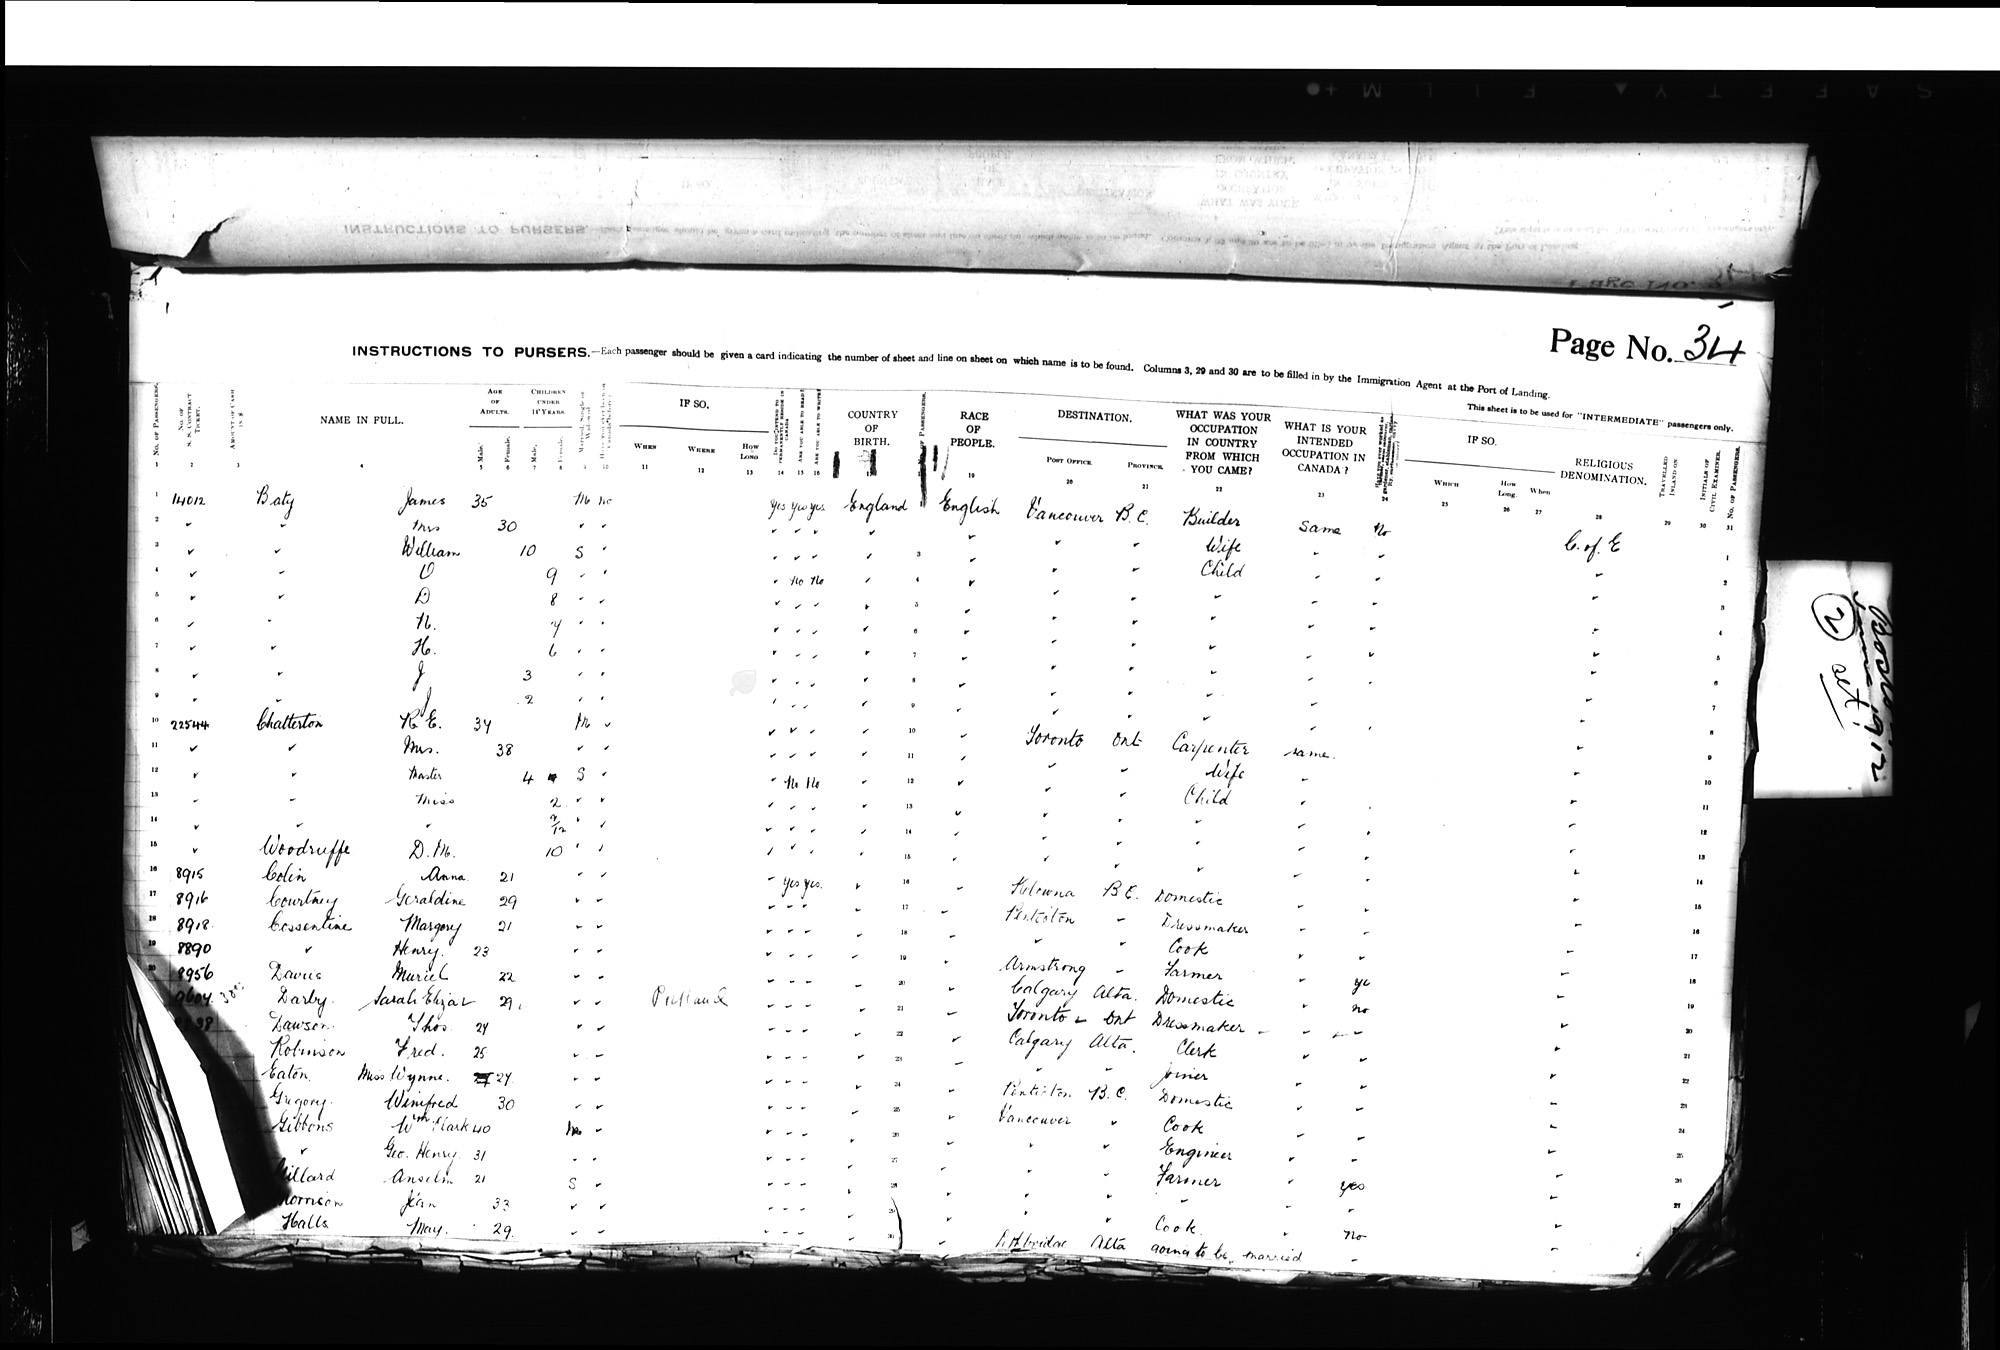 Digitized page of Passenger Lists for Image No.: CANIMM1913PLIST_0000406960-00192